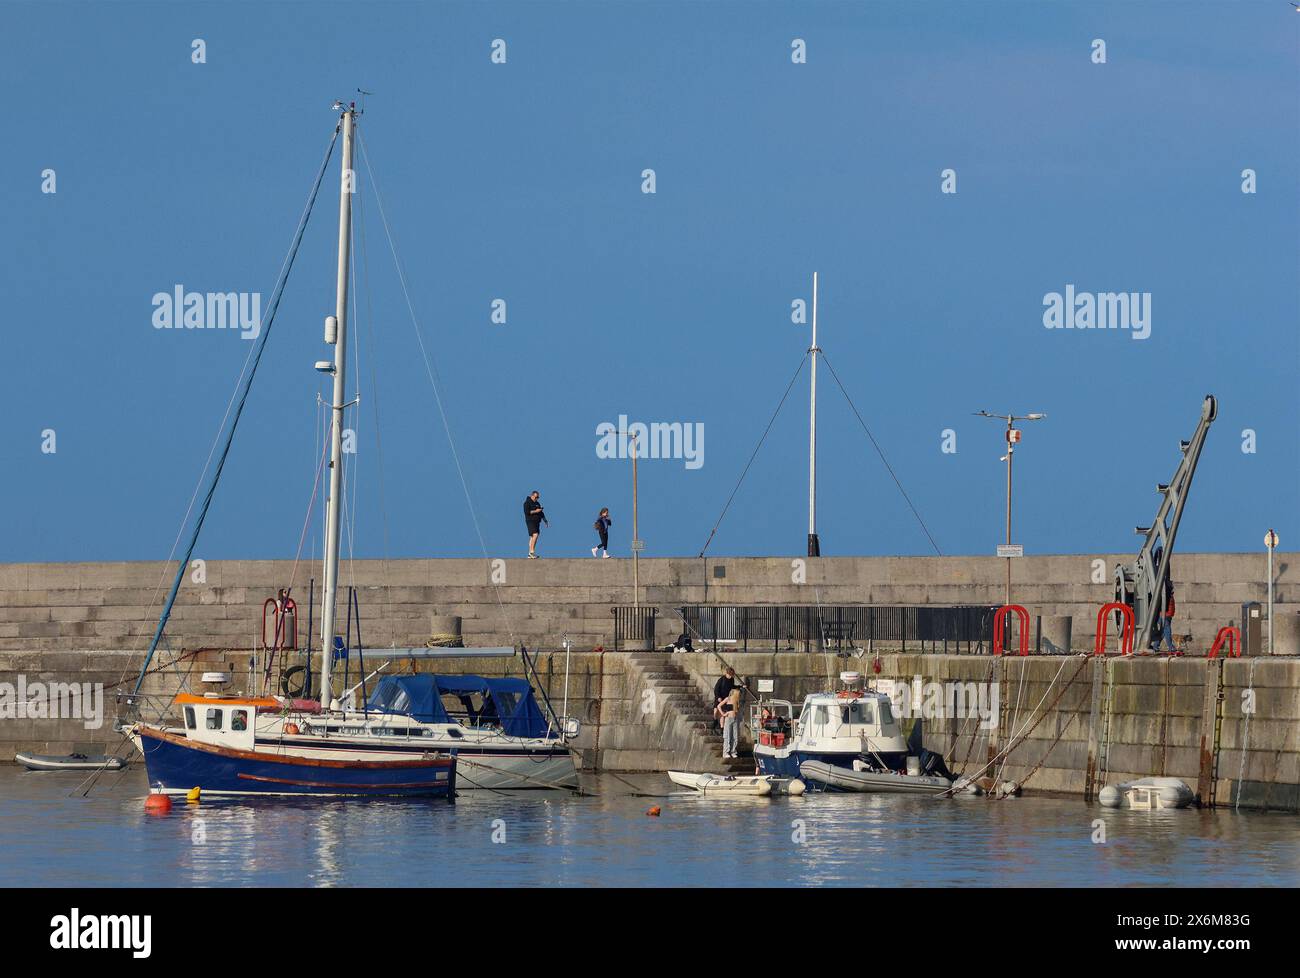 Donaghadee, County Down, Northern Ireland, UK. 15th May 2024. UK weather - a glorious sunny day on the east coast of Northern  Ireland,  at the coatsal village of Donaghadee, County Down. Credit: CAZIMB/Alamy Live News. Stock Photo